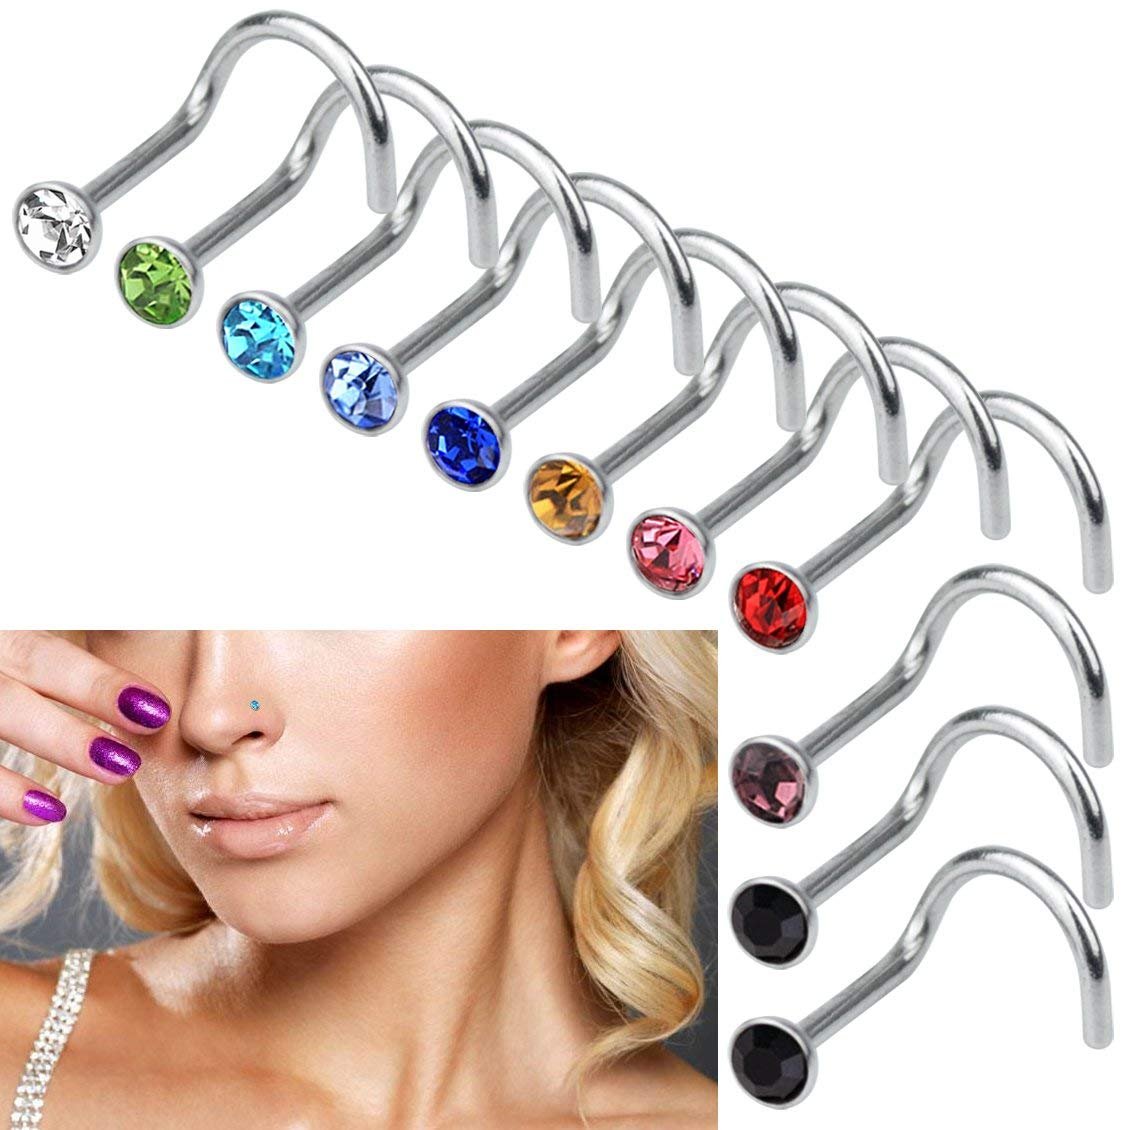 Rbenxia 20G 316L Nose Studs Rings 2.2MM Rhinestone Stainless Steel Nose Body Piercing Rings 10 Pcs Random Color for Unisex